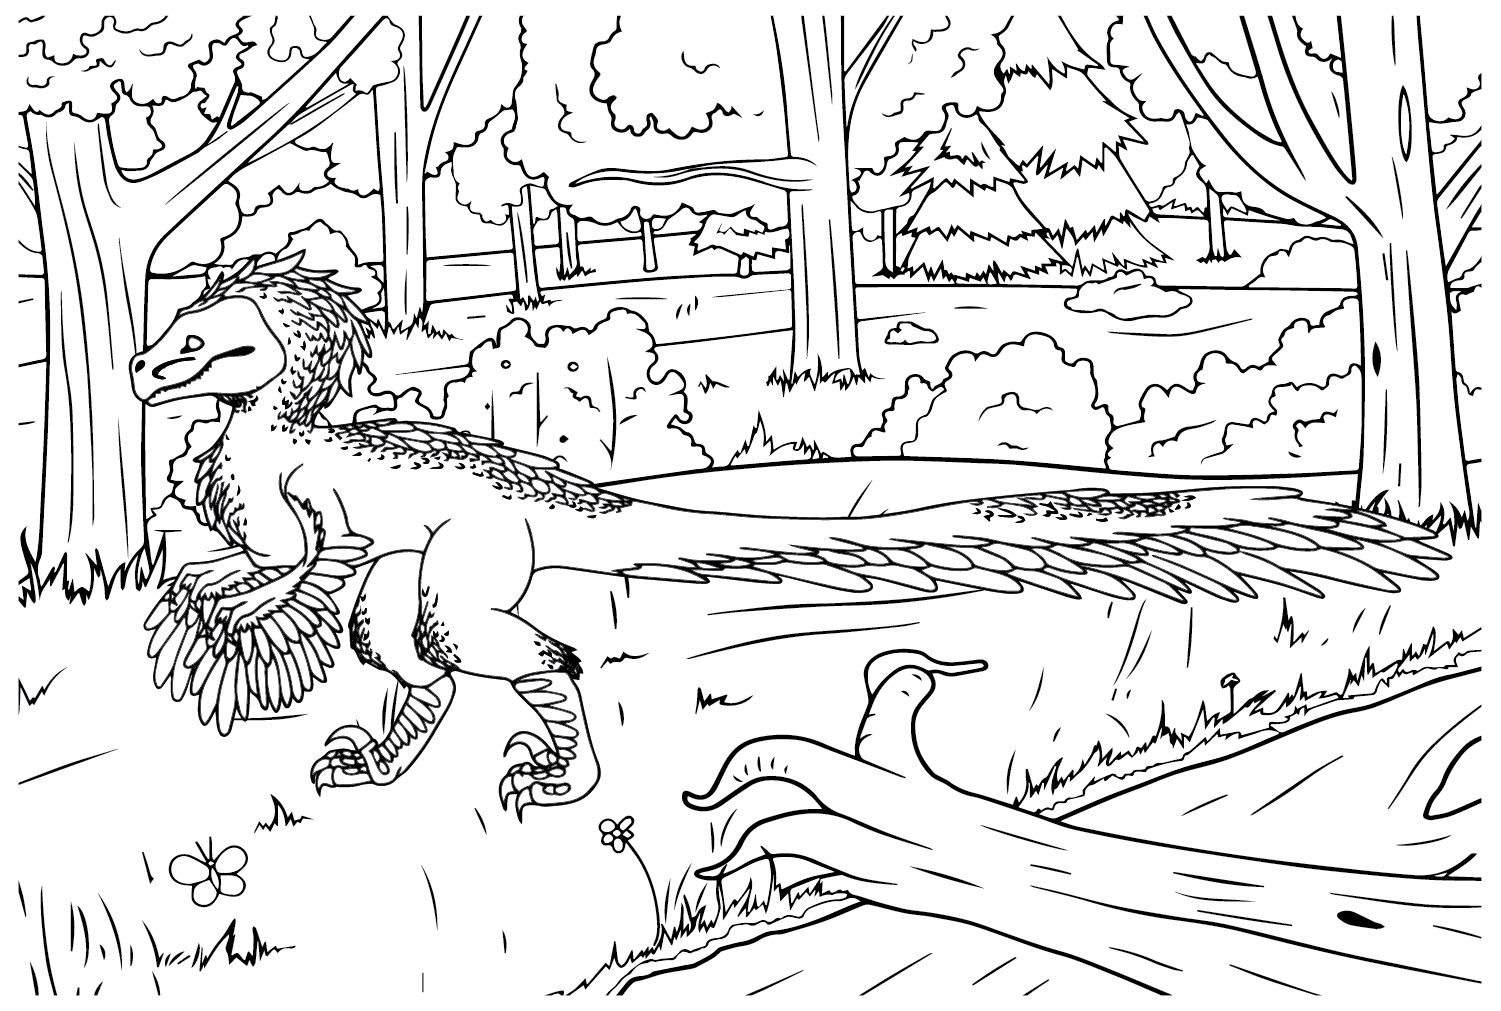 Realistic Utahraptor coloring page from Dinosaurs